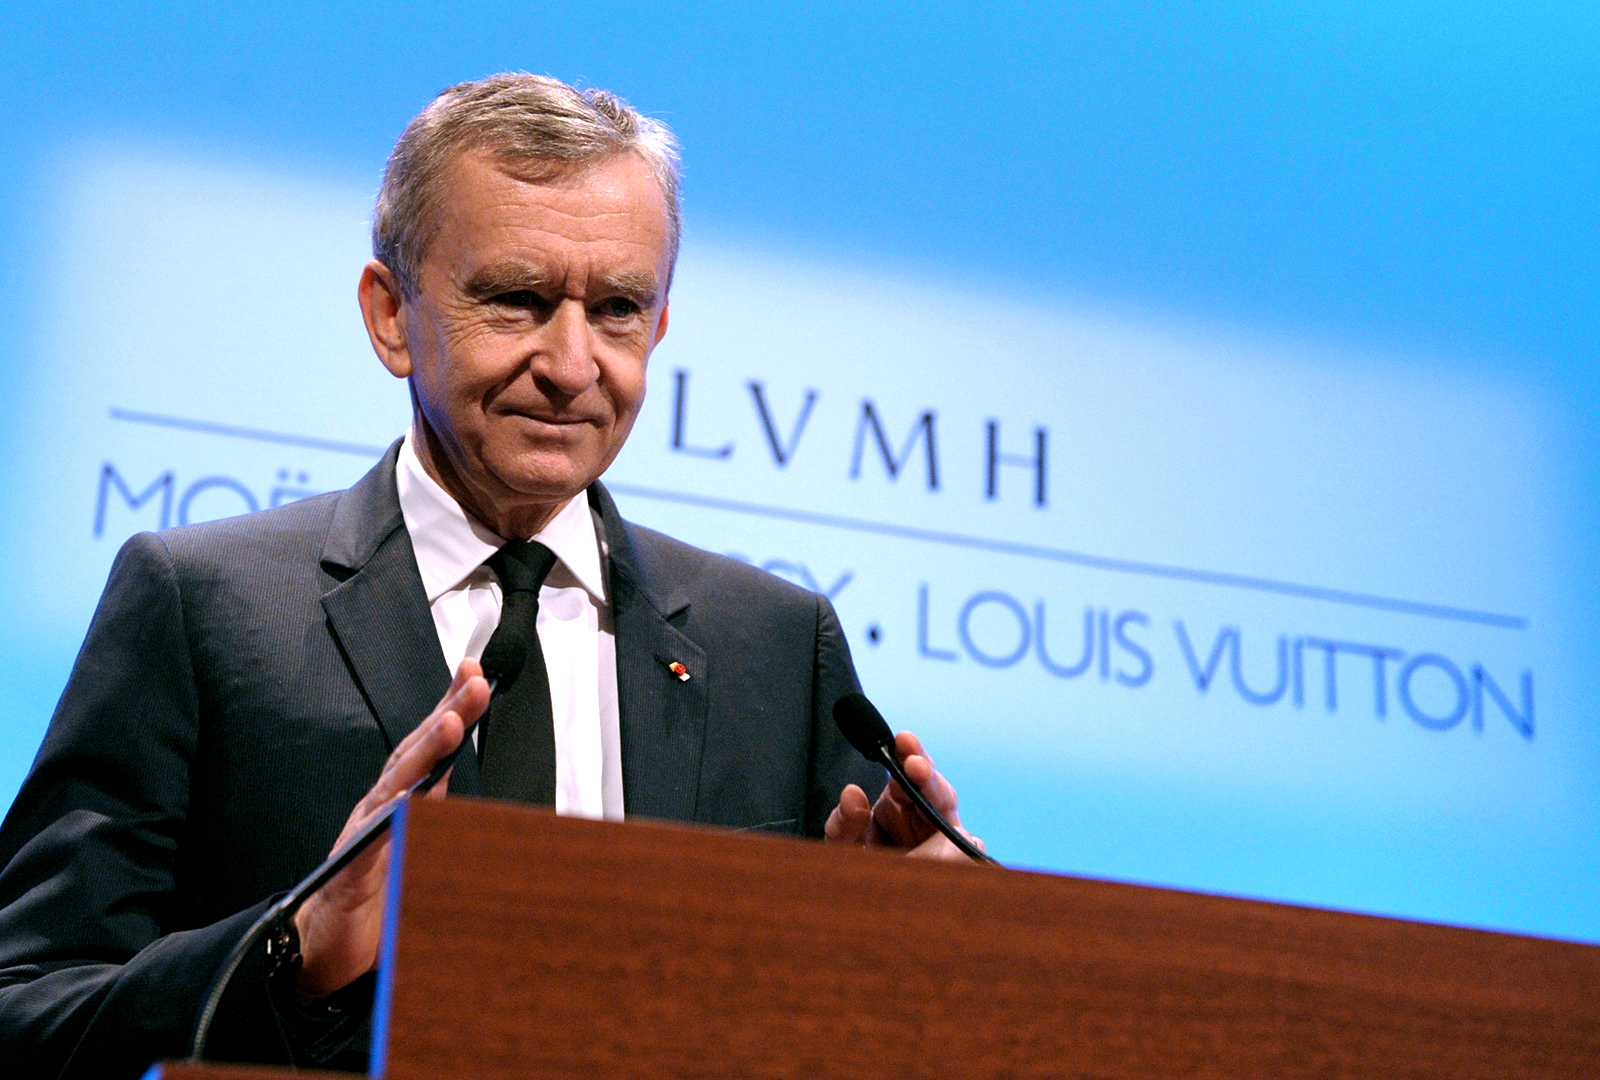 Meet Bernard Arnault, the richest man in the world and the owner of Louis  Vuitton